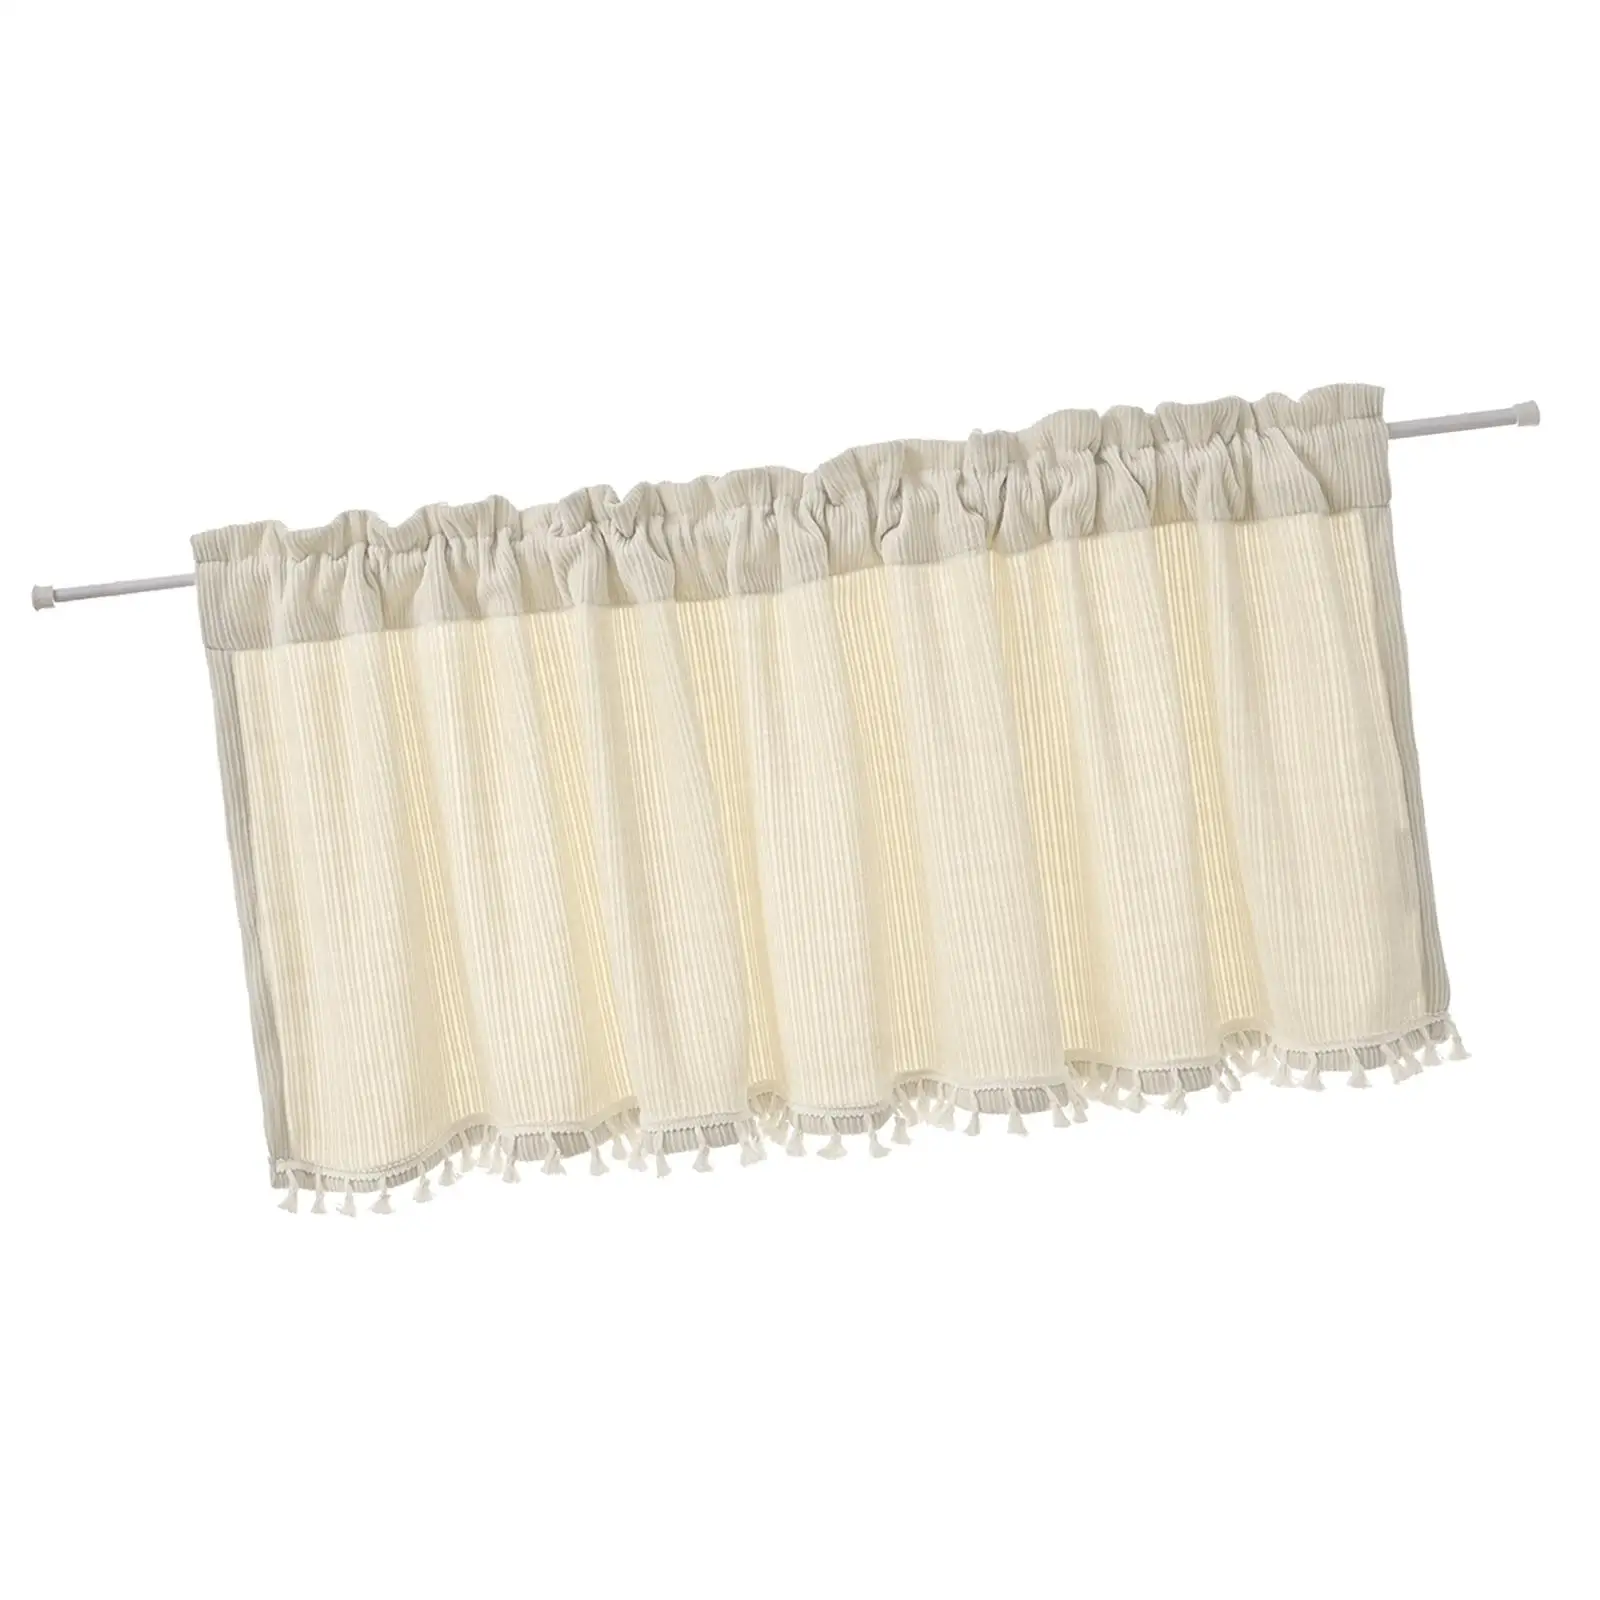 Window Curtain, Covering Shade, Blackout Drapes, Window Treatment for Living Room Kitchen Farmhouse Bathroom Decoration